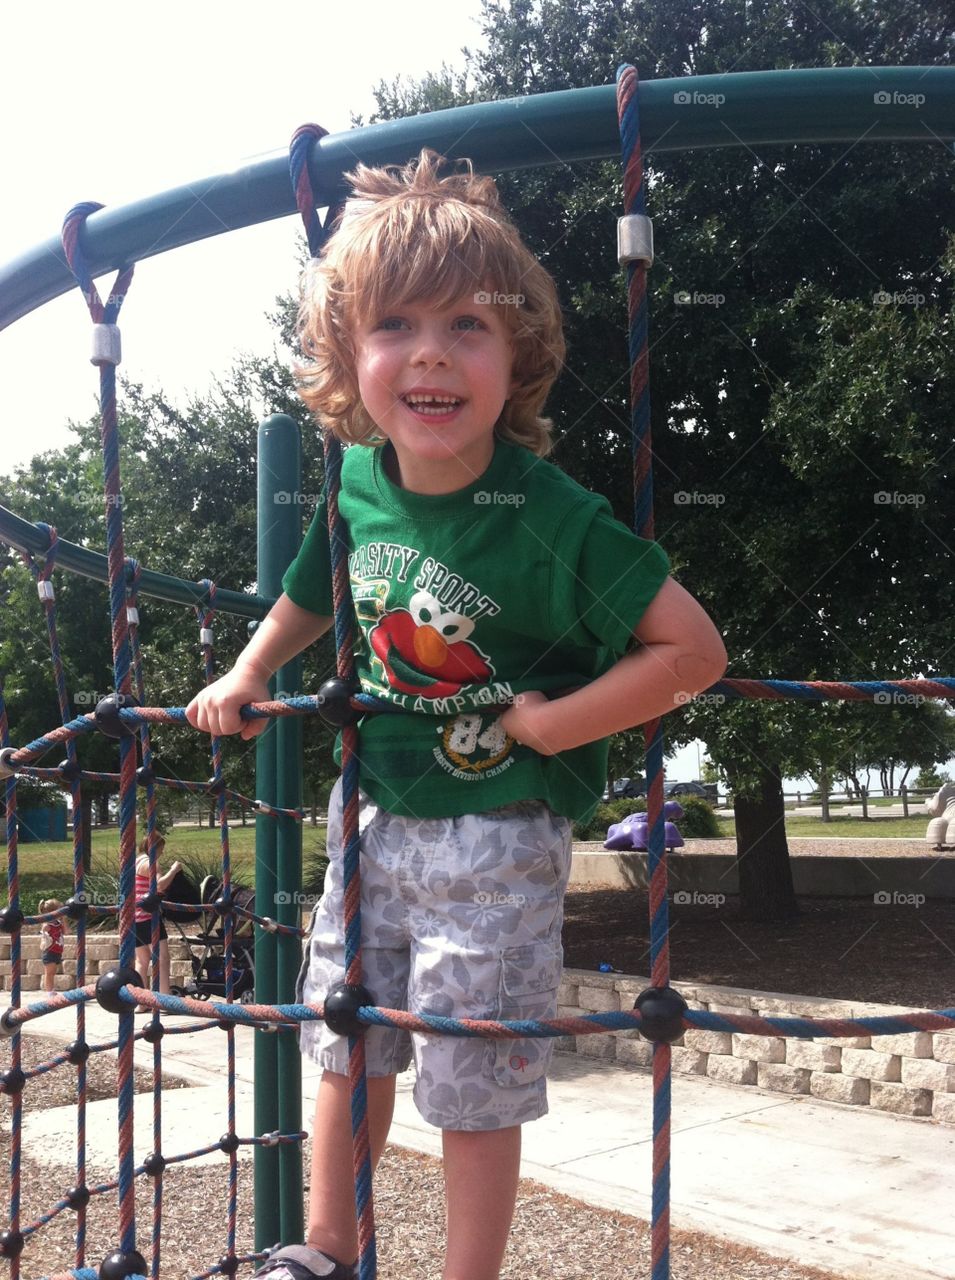 My youngest son having a blast at the park